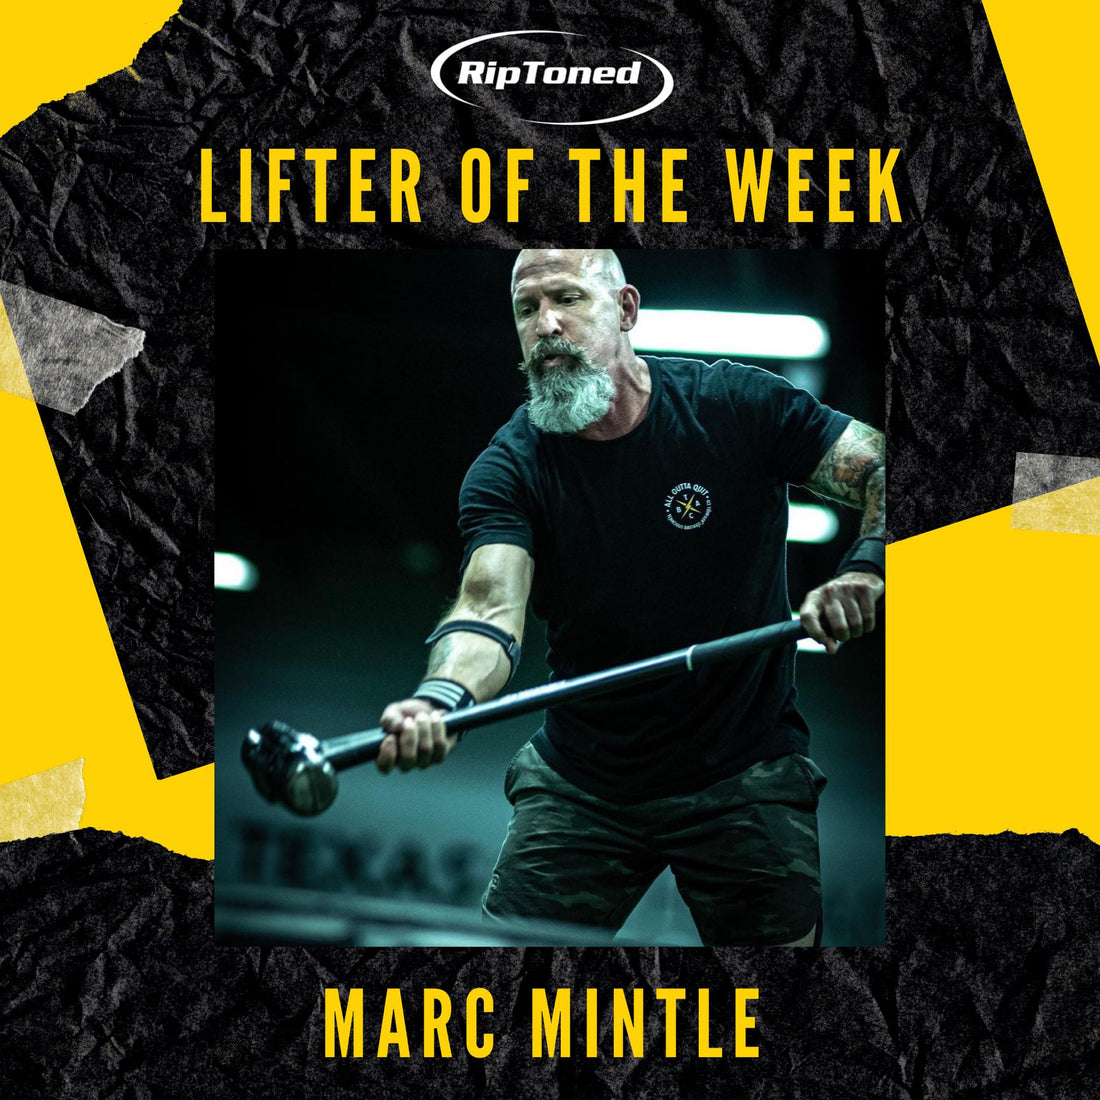 Lifter of the Week - Marc Mintle - Rip Toned